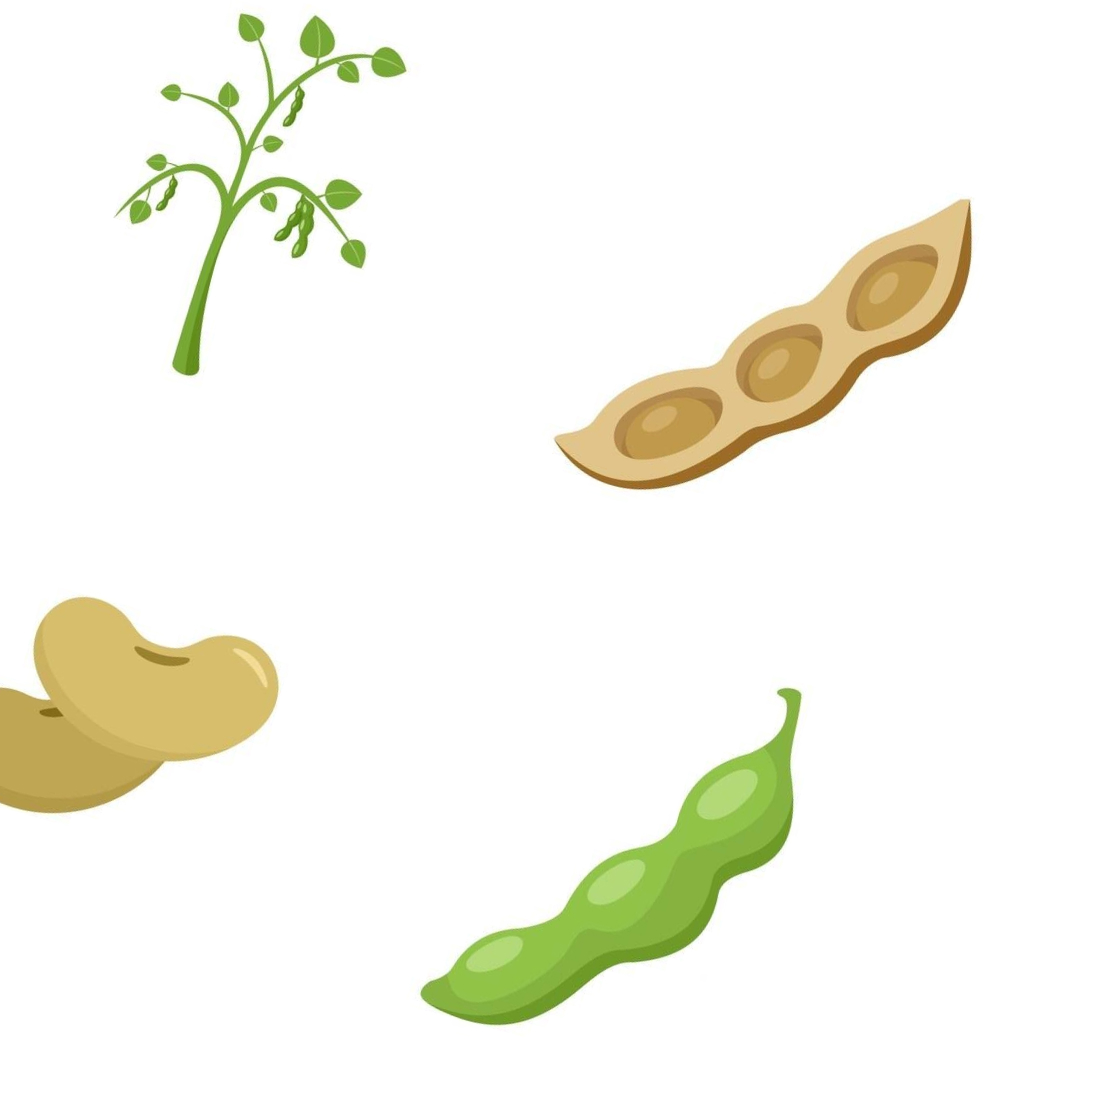 Soybean soy beans seed icons set of prints.